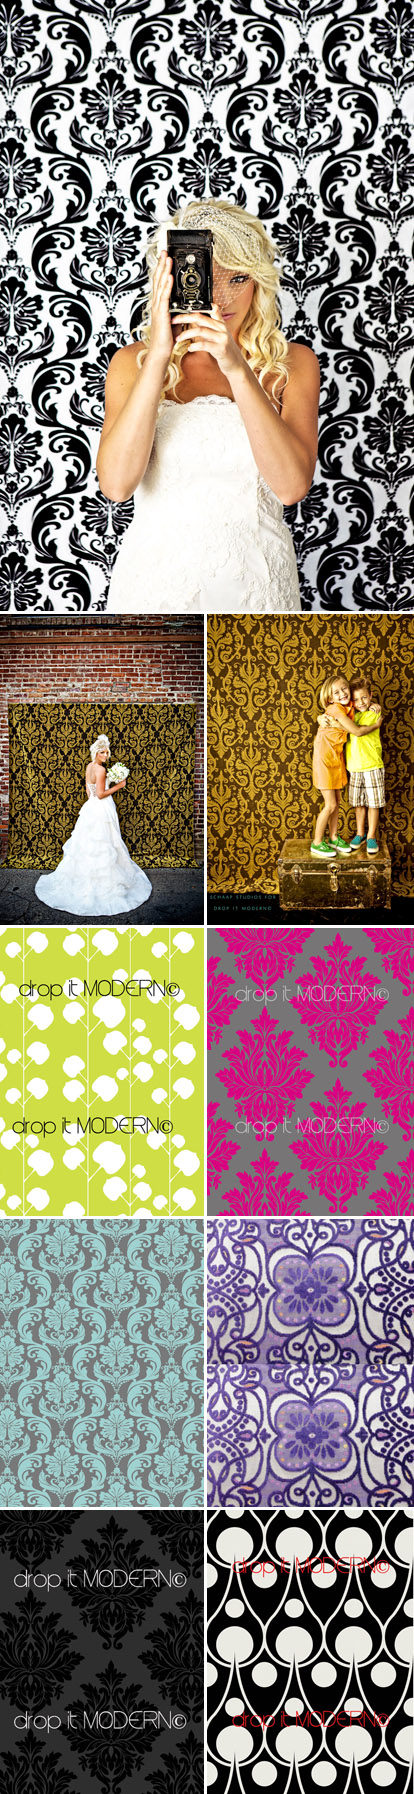 Damask and graphic print fabric photo backdrops from Drop It Modern, all images from dropitmodern.com and Schaap Studios